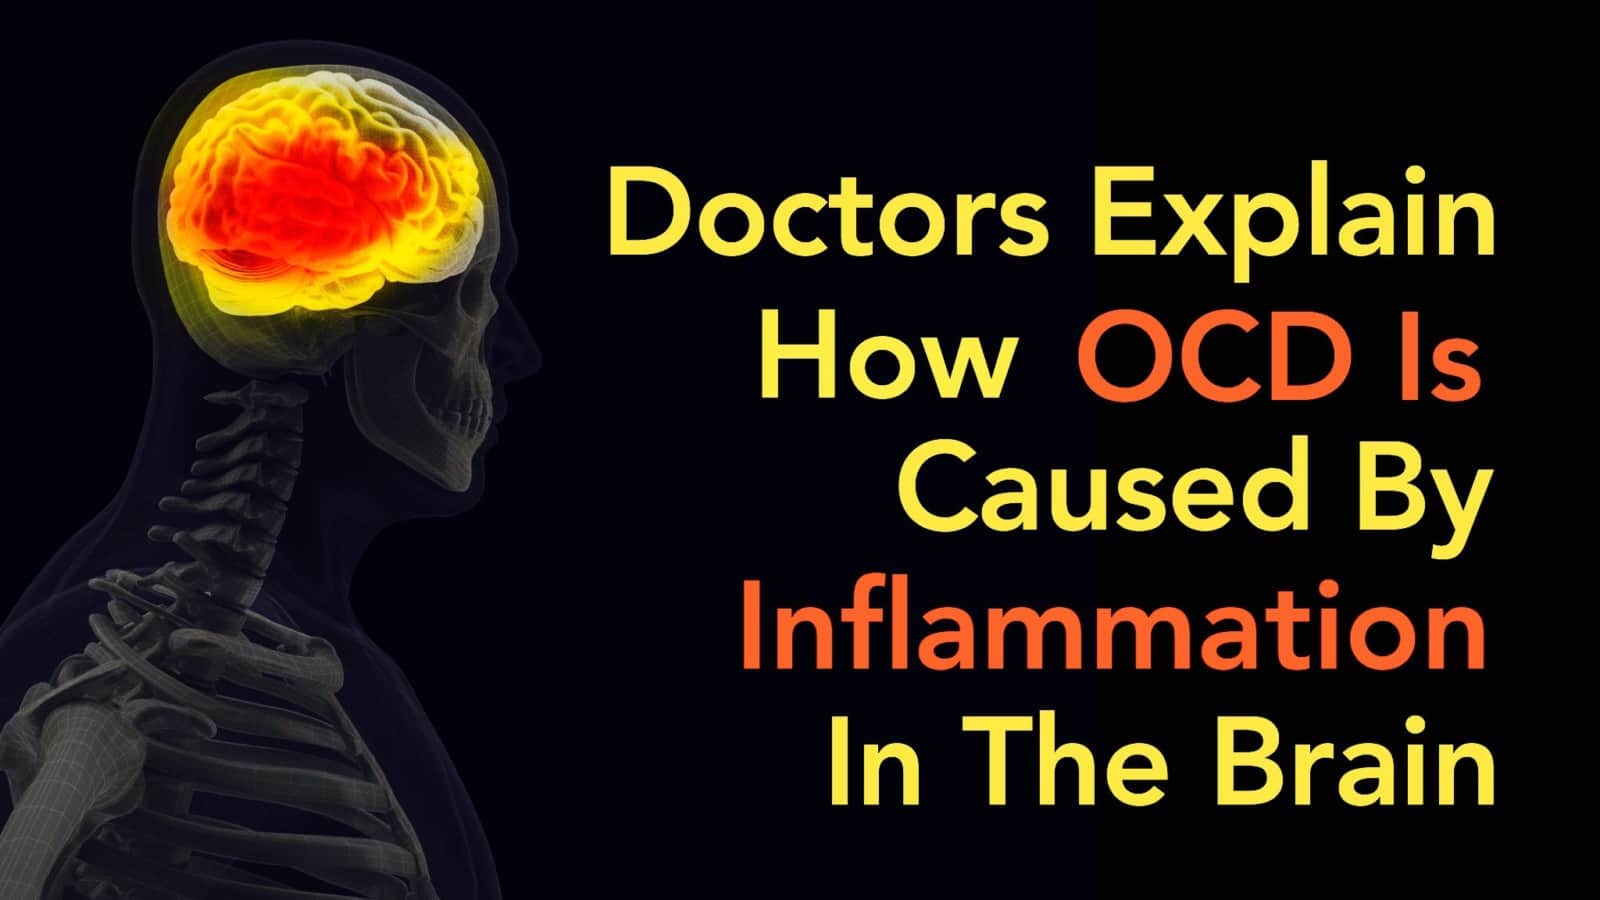 Doctors Explain How OCD Is Caused By Inflammation In The Brain